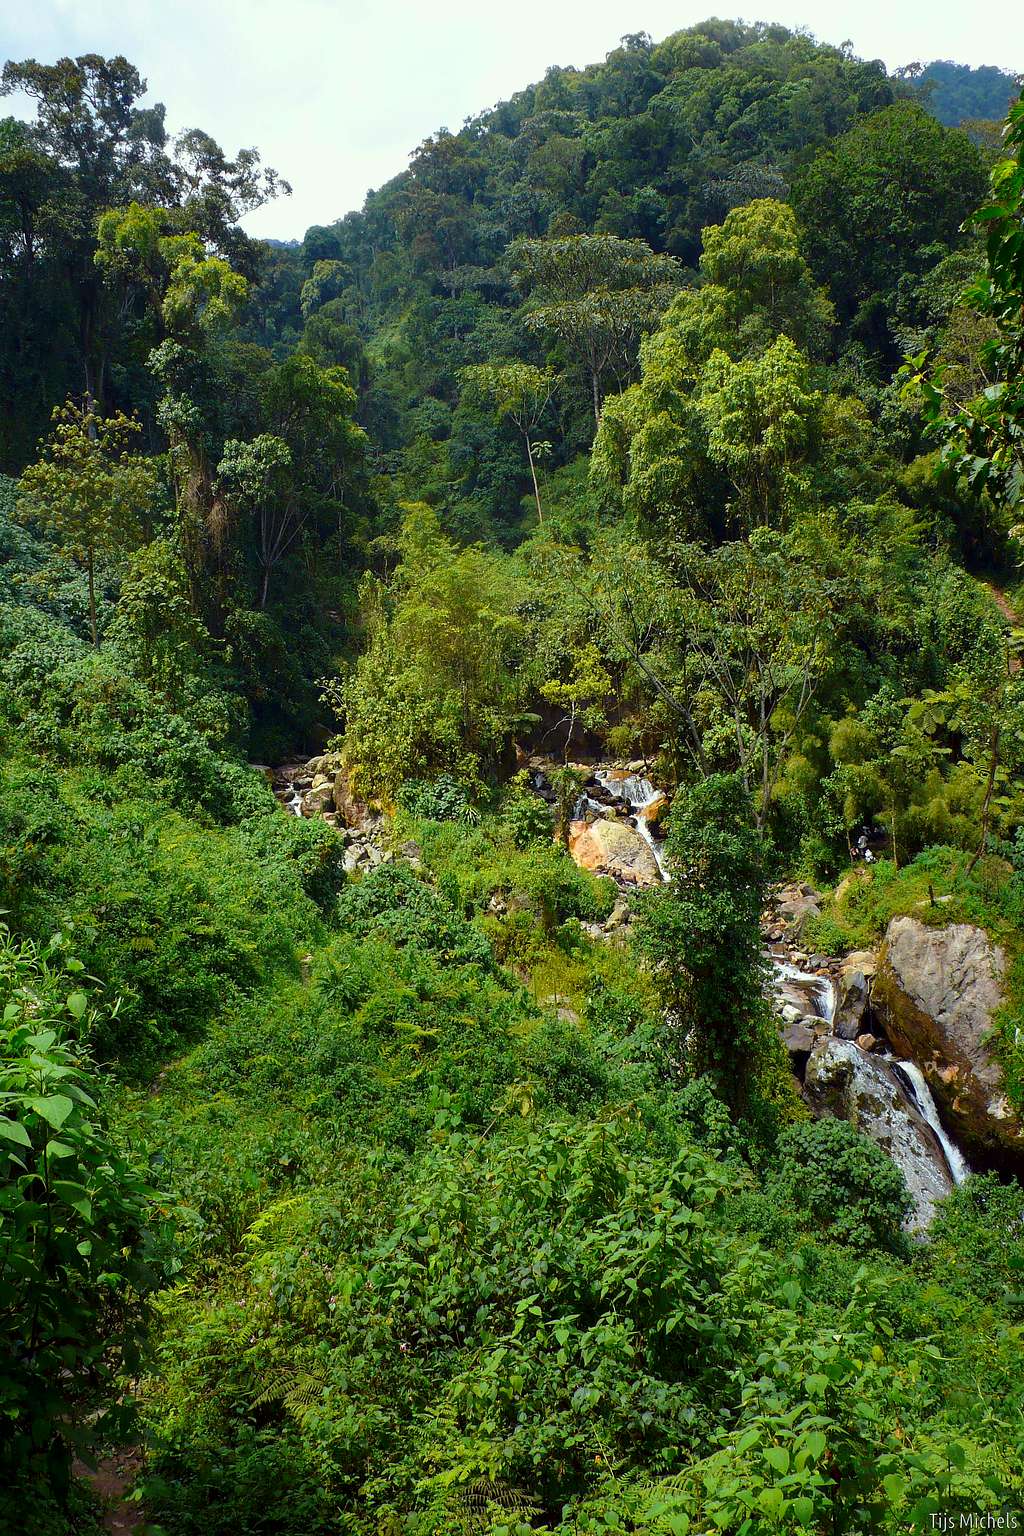 Porters in the equatorial rainforest